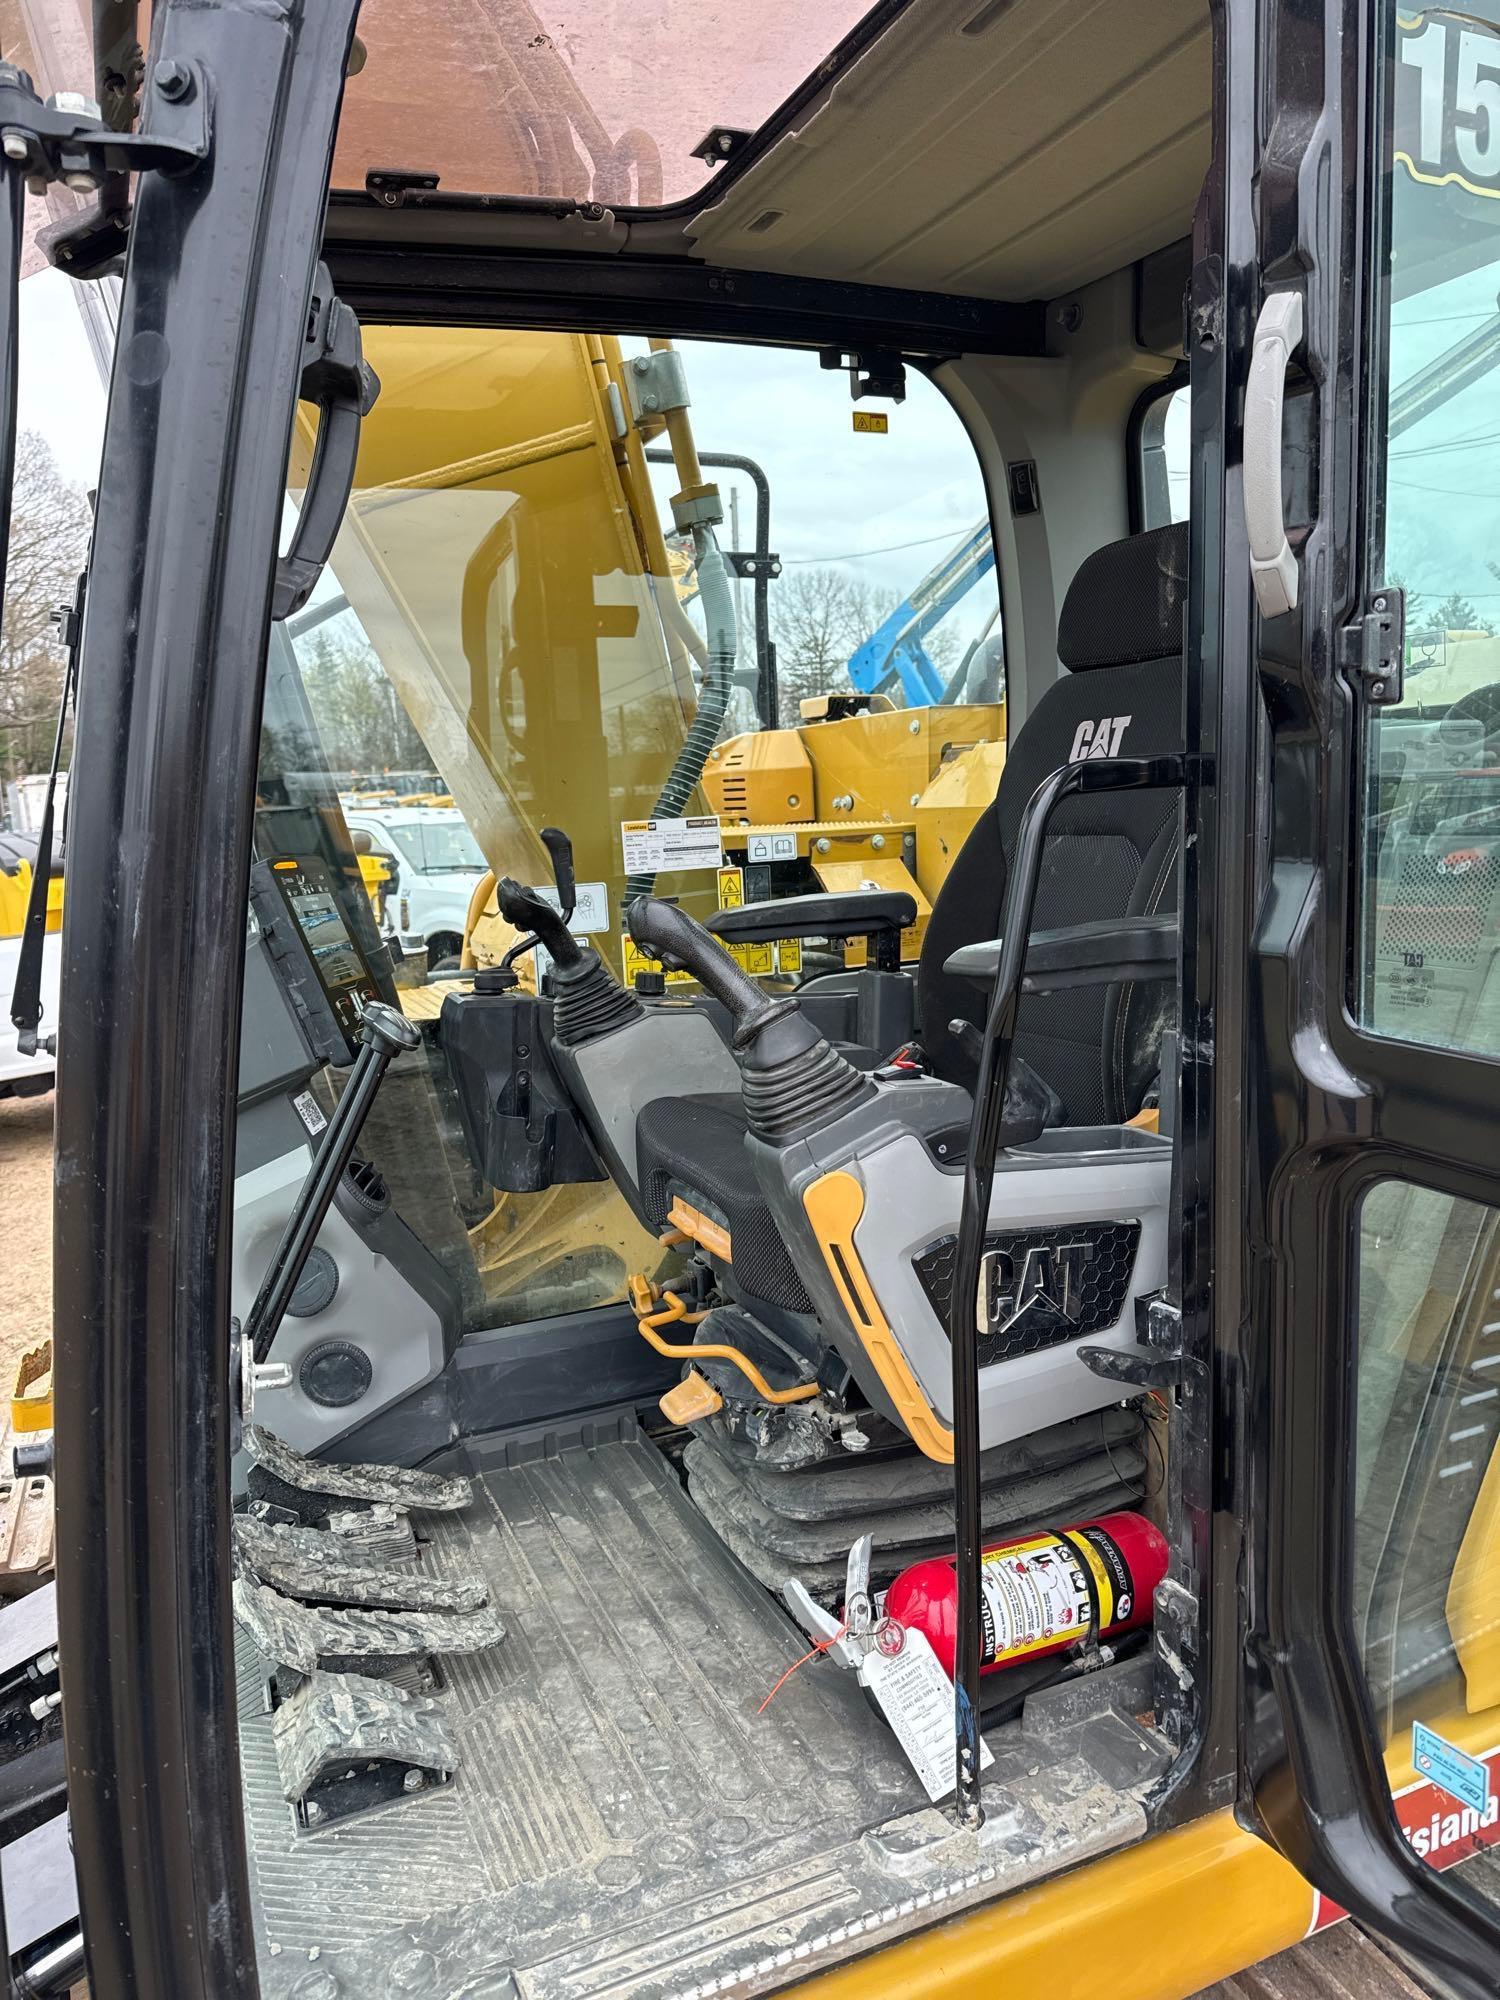 2021 CAT 315 HYDRAULIC EXCAVATOR SN:WKX10119 powered by Cat diesel engine, equipped with deluxe cab,